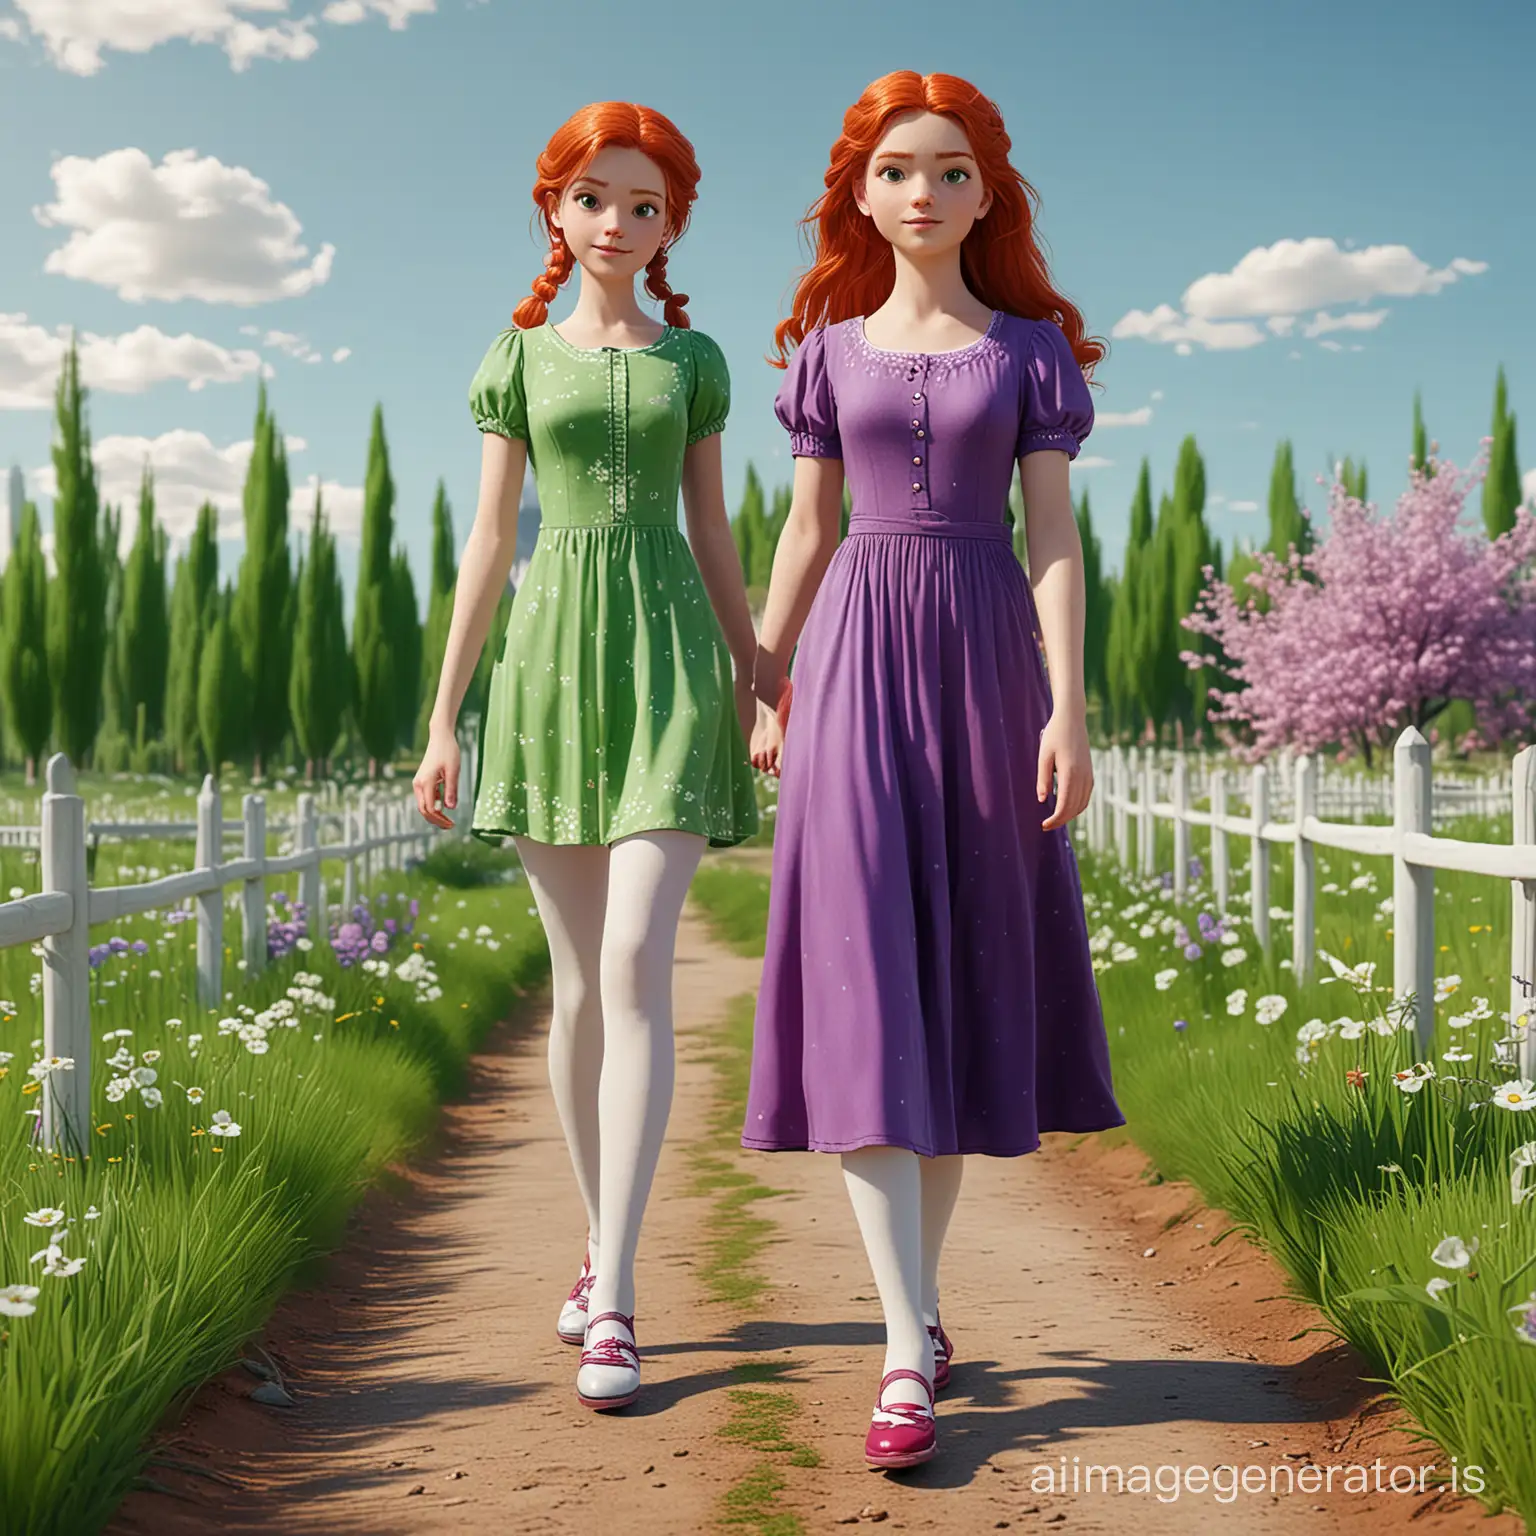 Enchanting-3D-Spring-Landscape-with-RedHaired-Girl-in-Green-Dress